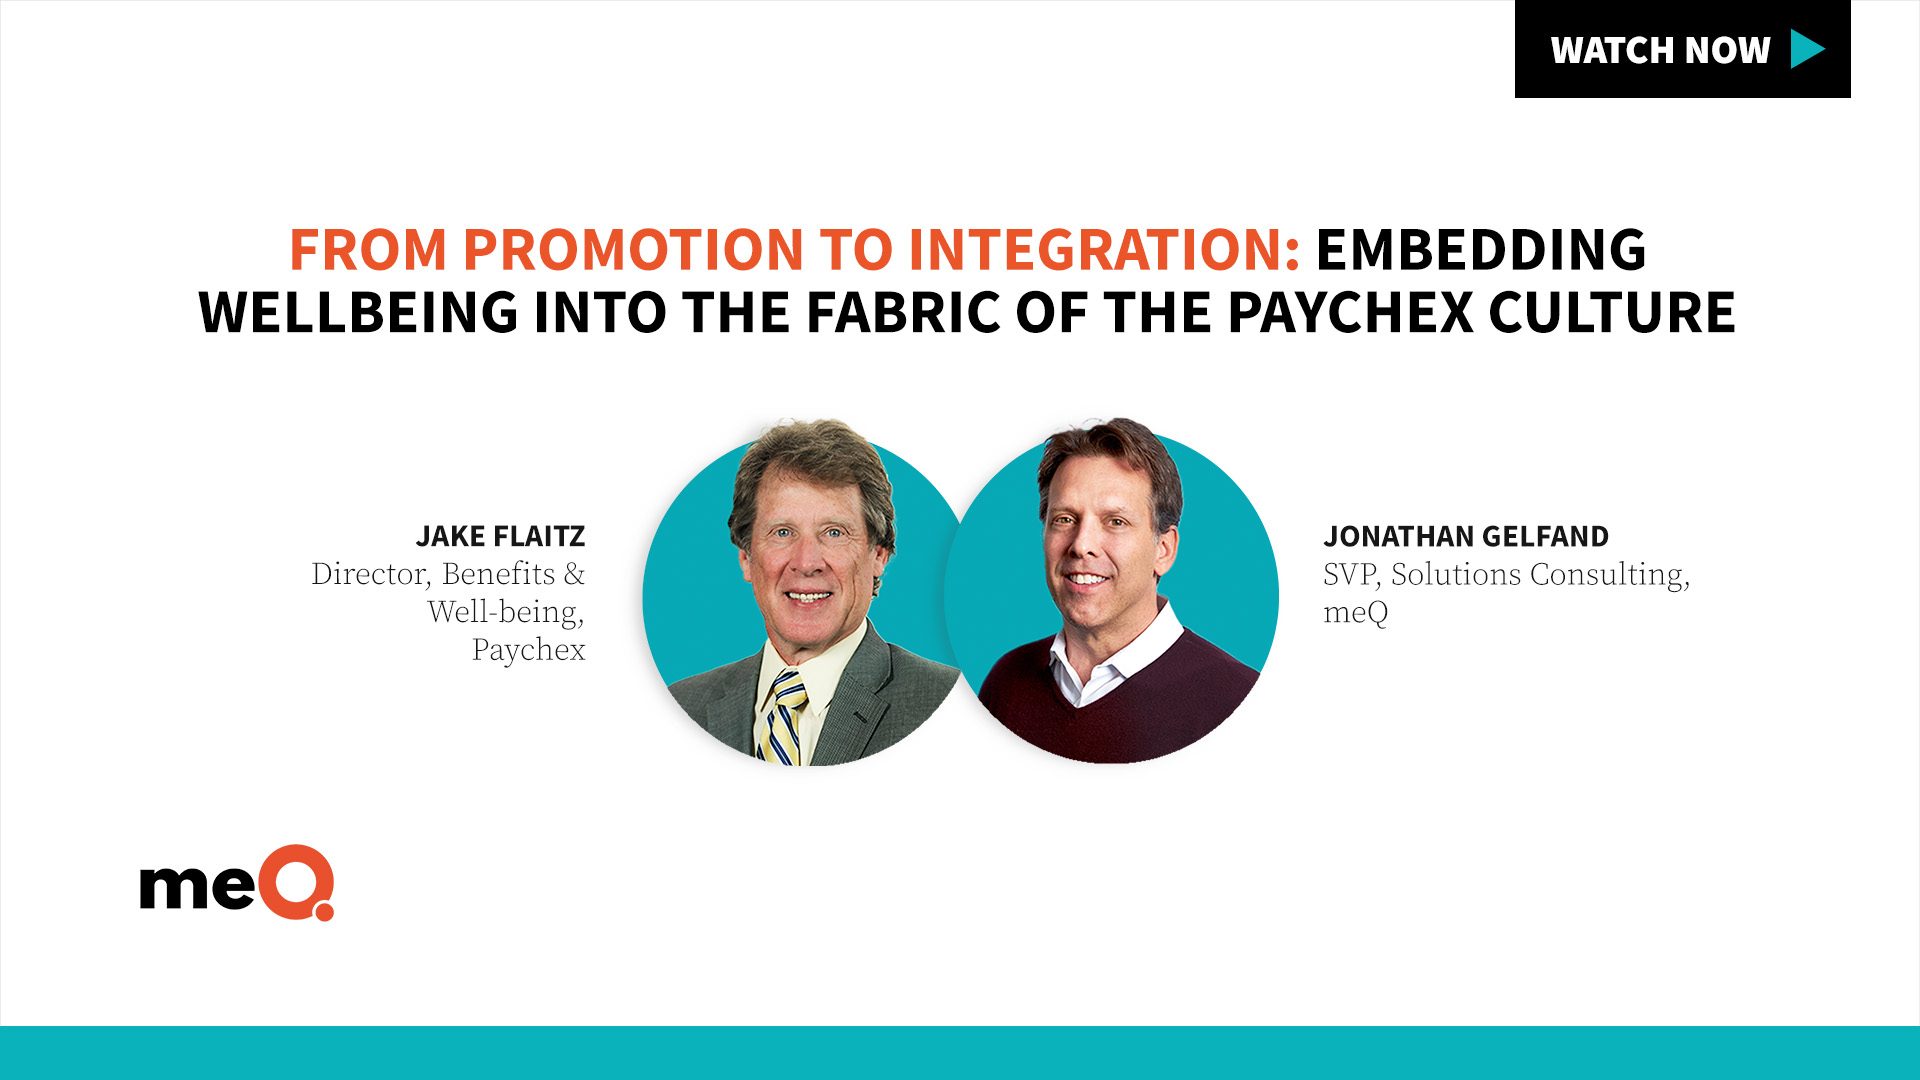 Embedding Wellbeing into the Fabric of Paychex Culture